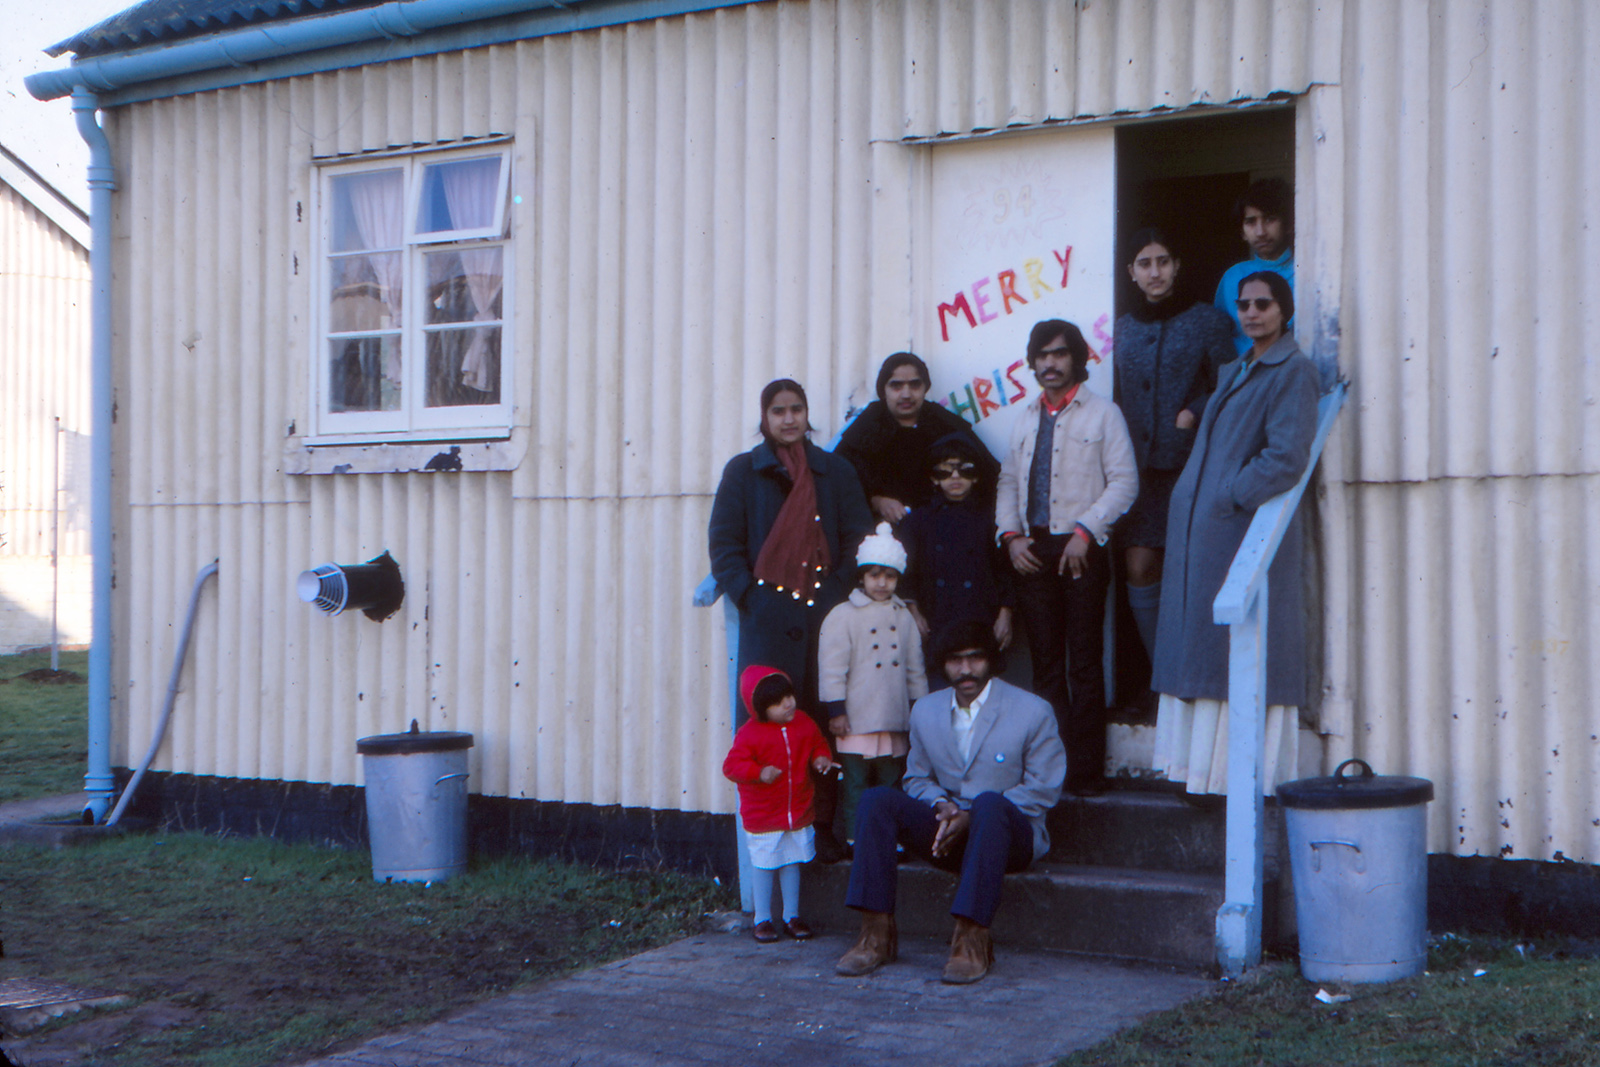 Lucy Fulford, The Exiled. Photo: Christmas 1972 for the Majothis, their extended family and friends, was spent in a corrugated iron billet at Doniford camp, one of the sites housing Ugandan Asian exiles. Photograph courtesy of the Majothi family